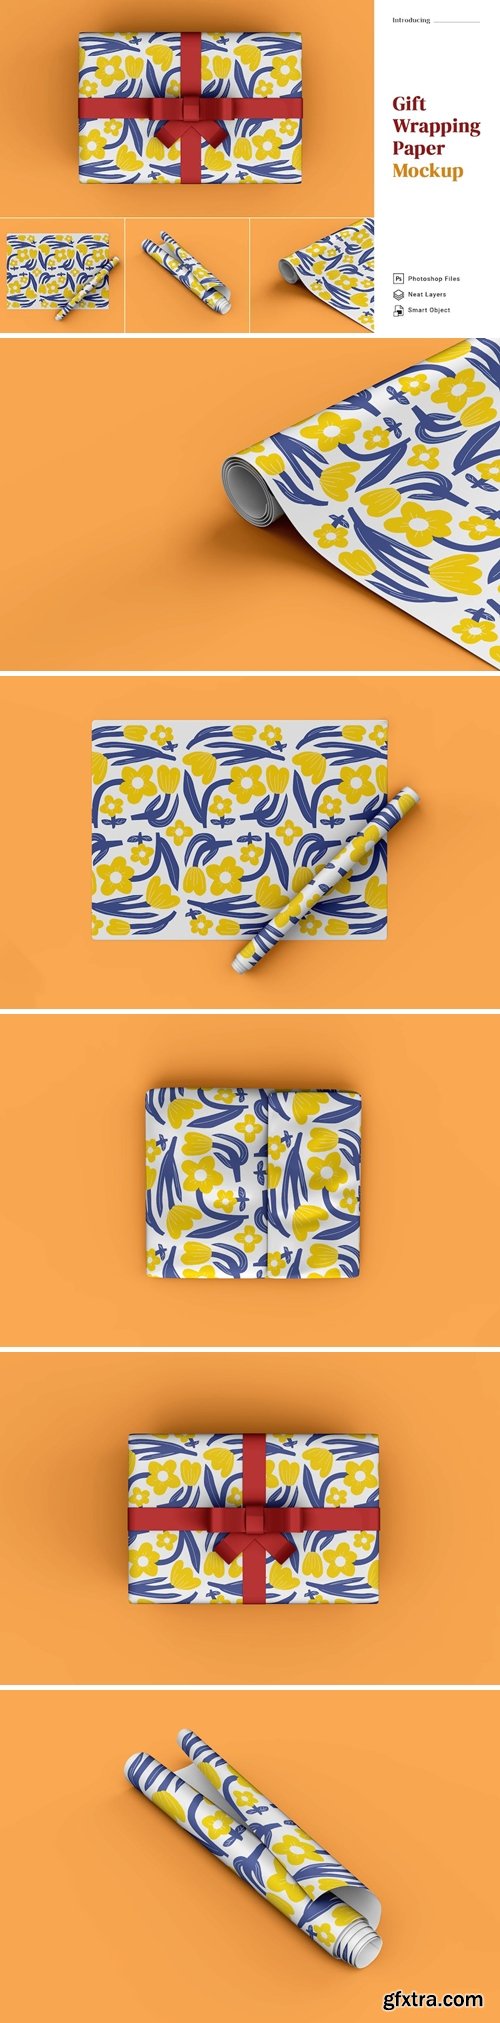 Gift Wrapping Paper Mockup 5 Views CPDRBLX